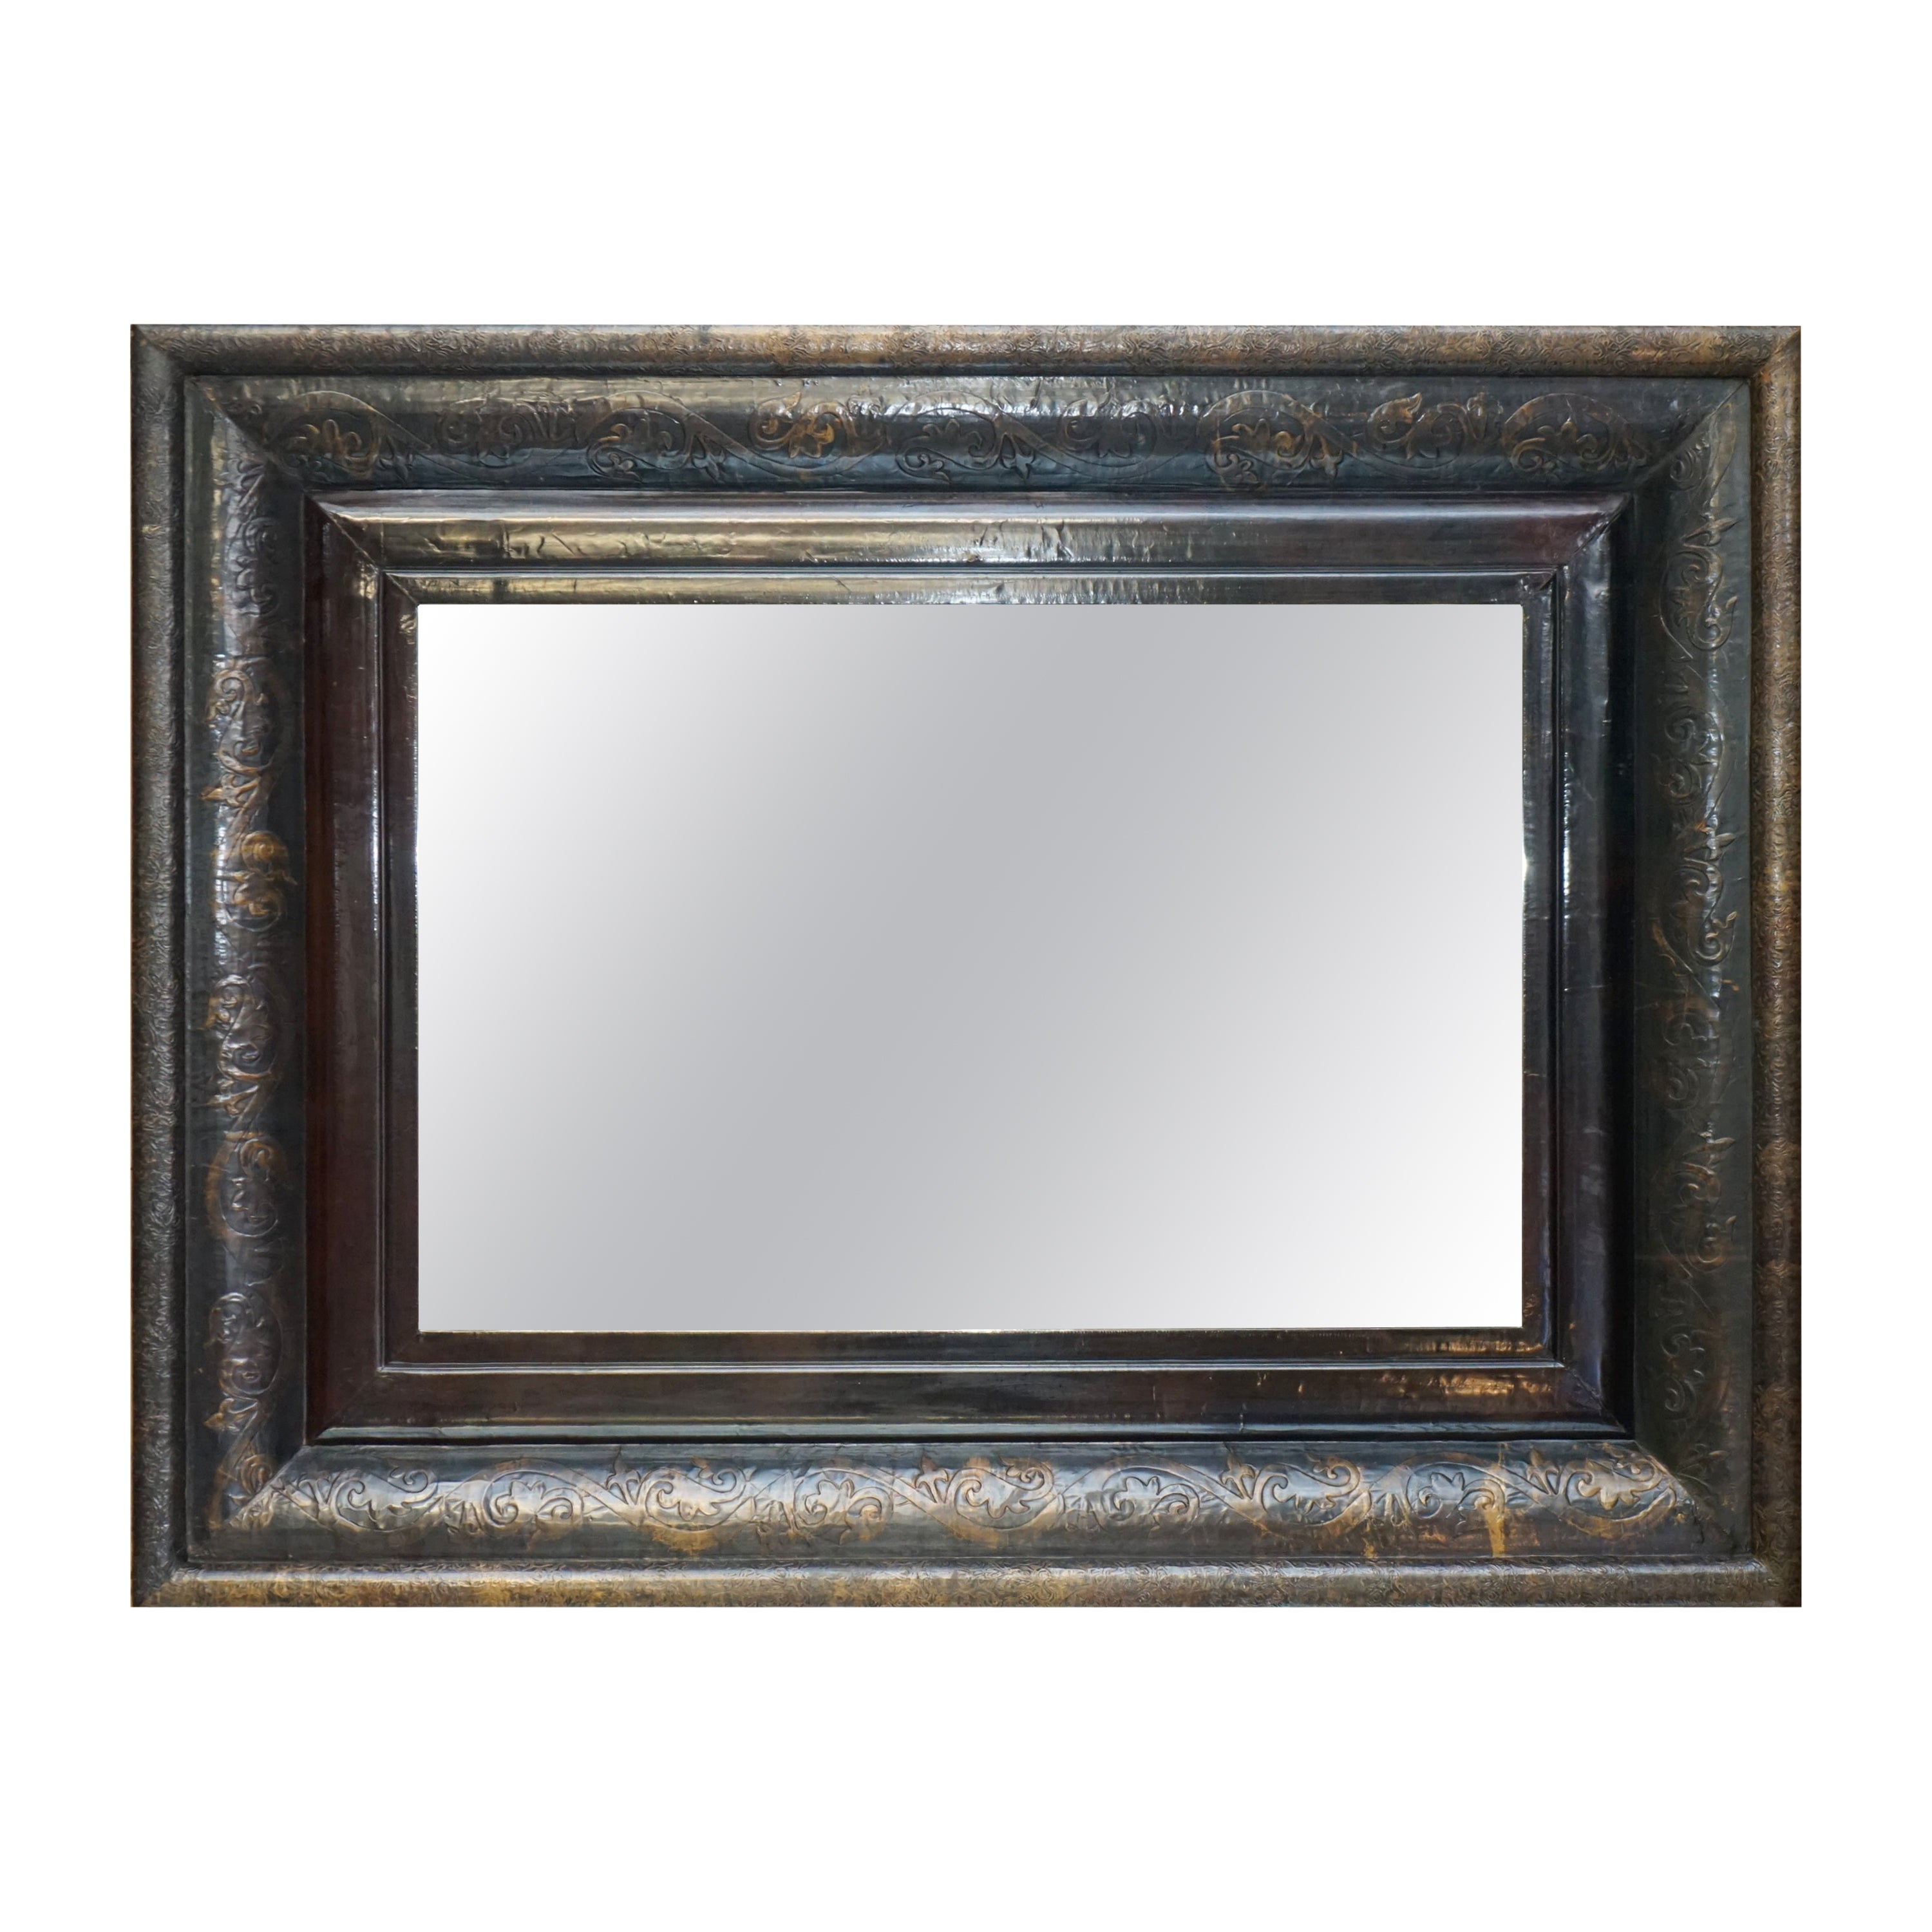 EXTRA LARGE 134CM X 103CM BRONZED REPOUSSE METAL FRAMED OVERMANTLE WALL MiRROR For Sale